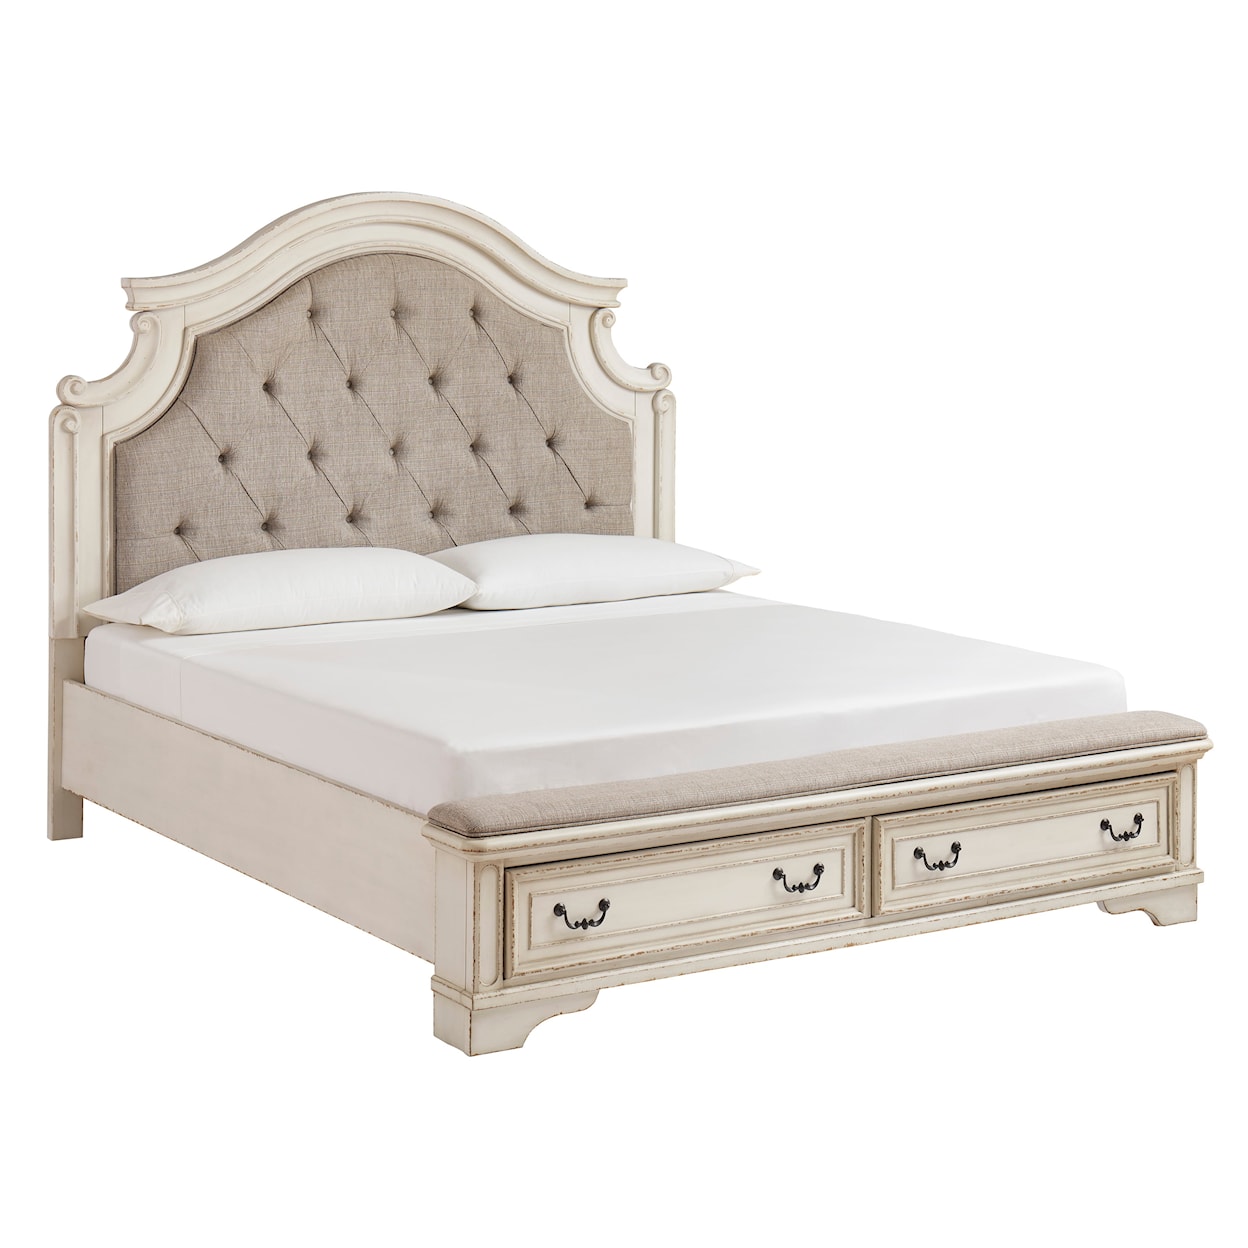 Signature Design by Ashley Furniture Realyn Queen Upholstered Storage Bed